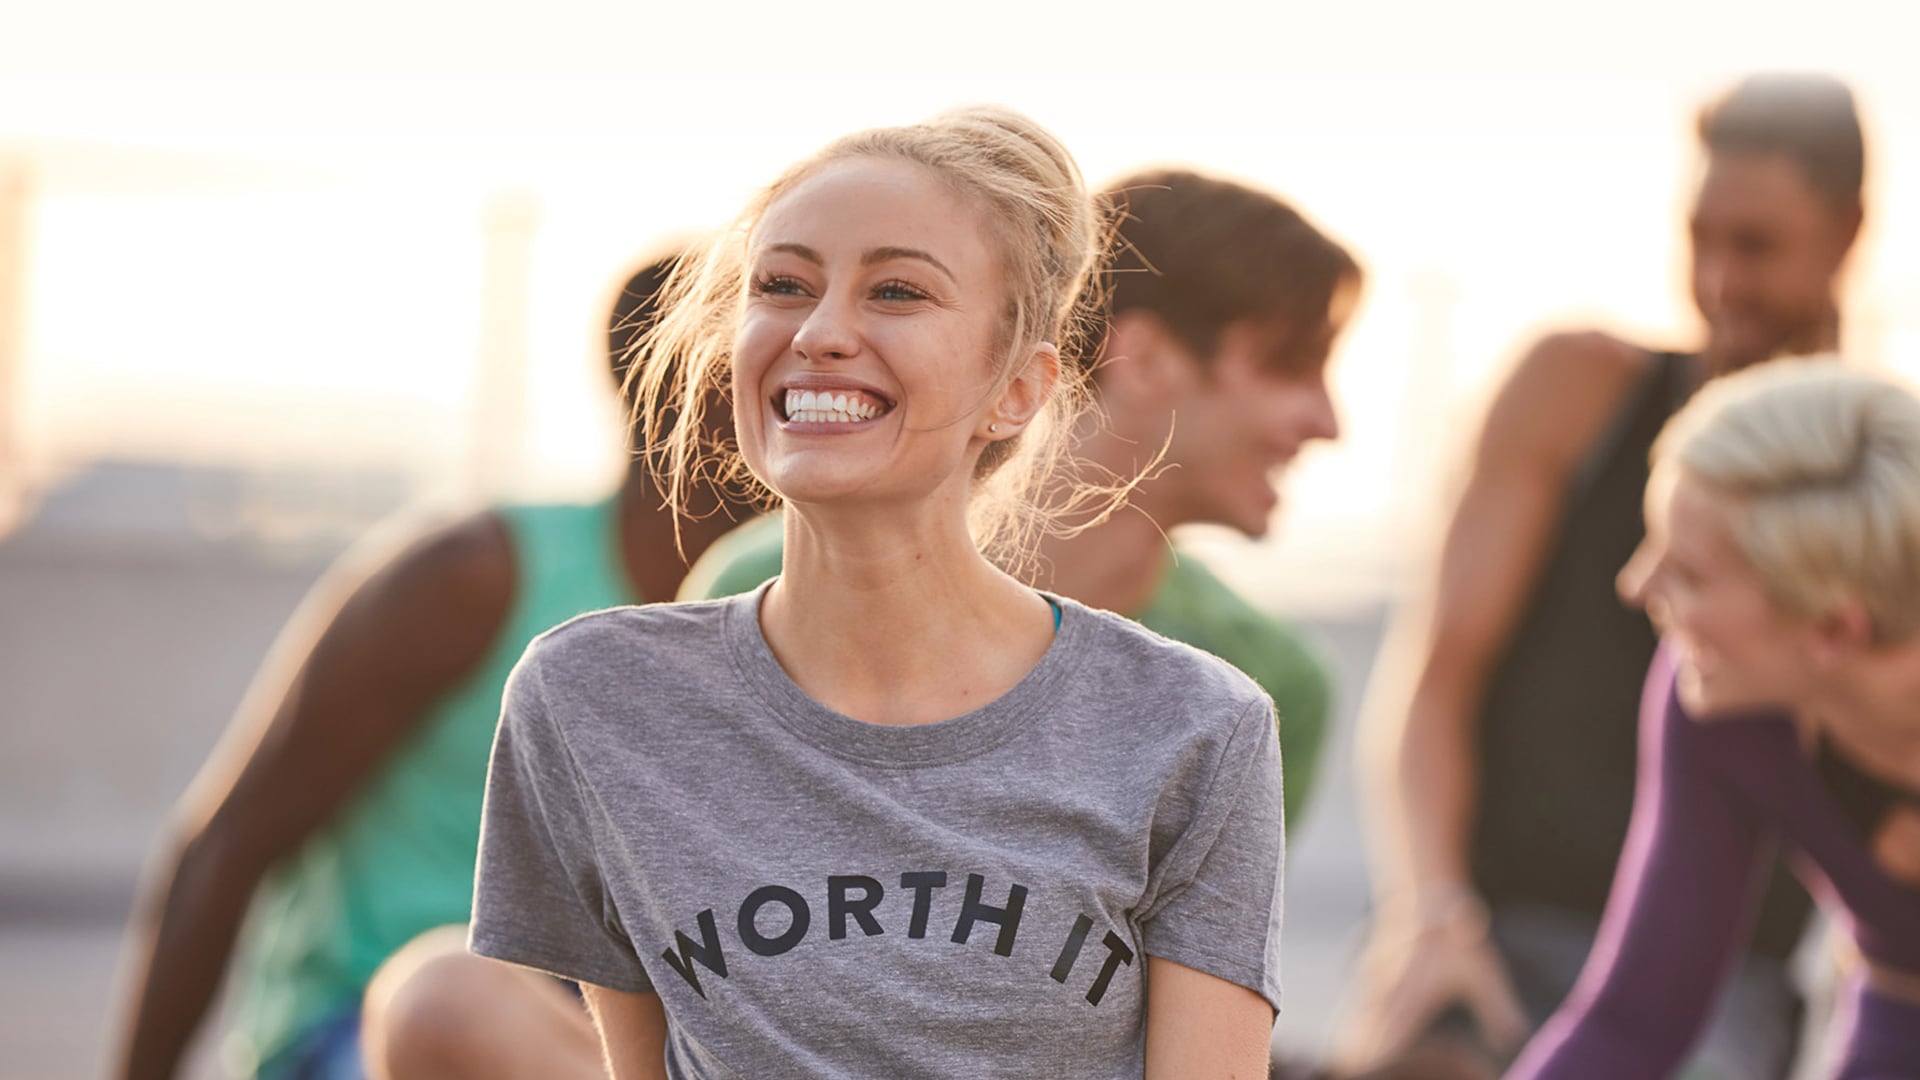 A young woman wearing a gray t-shirt that says "Worth it" smiles as an engaged group smile and laugh behind her.